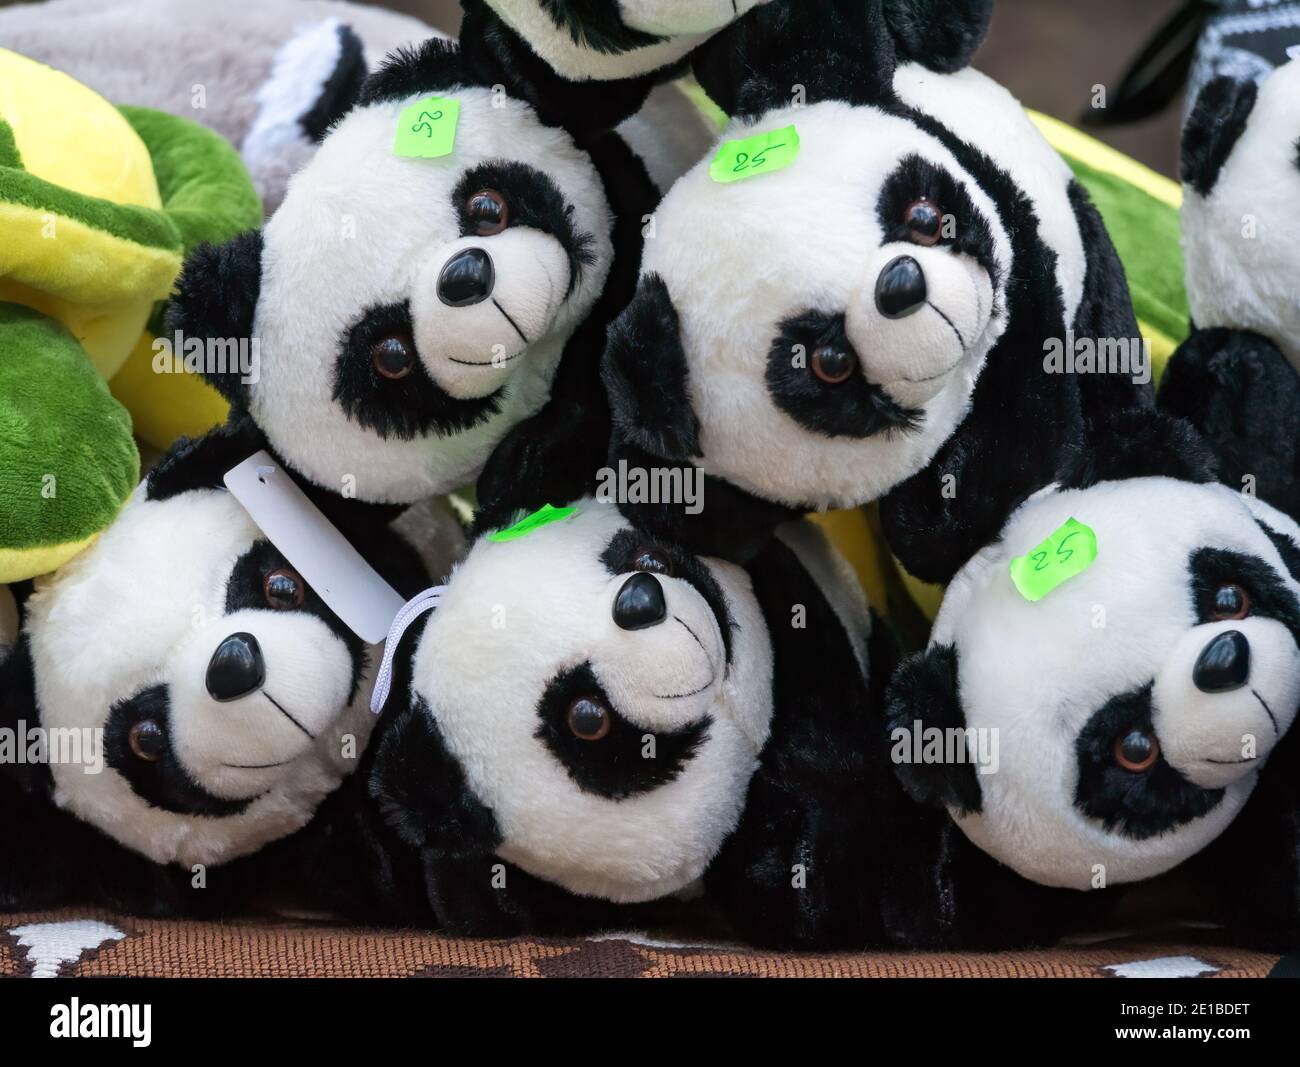 Cute plush toys or stuffed panda bear for sale with price tags